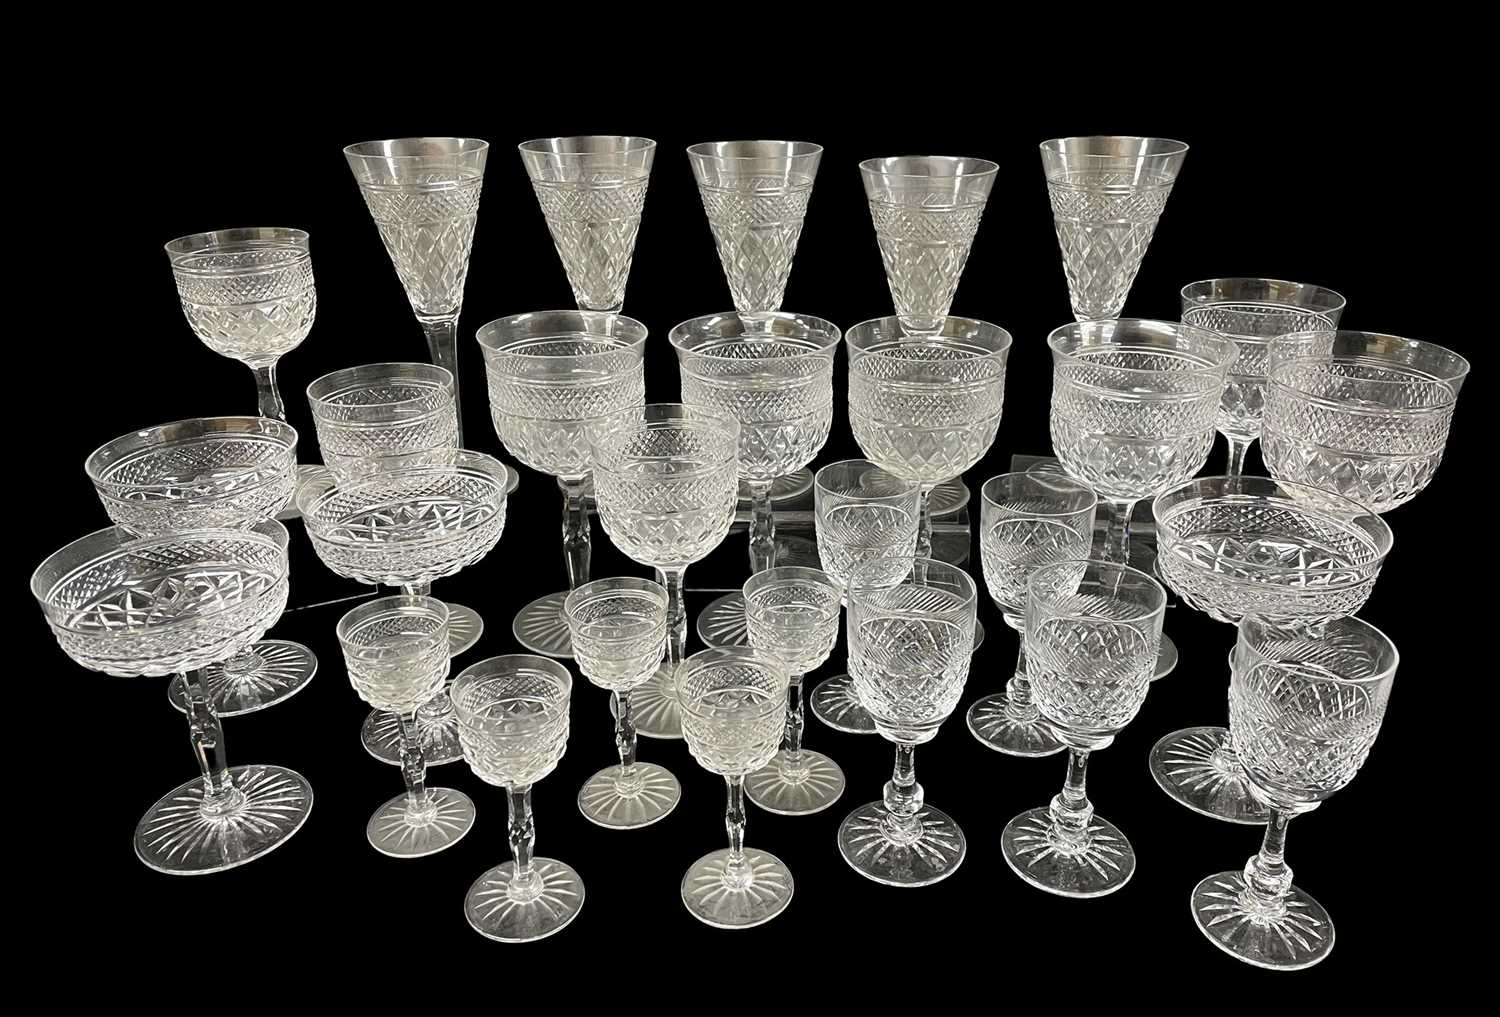 SUITE OF GOOD QUALITY VINTAGE CUT GLASS DRINKING GLASSES, decorated with hobnail and facet, shaped